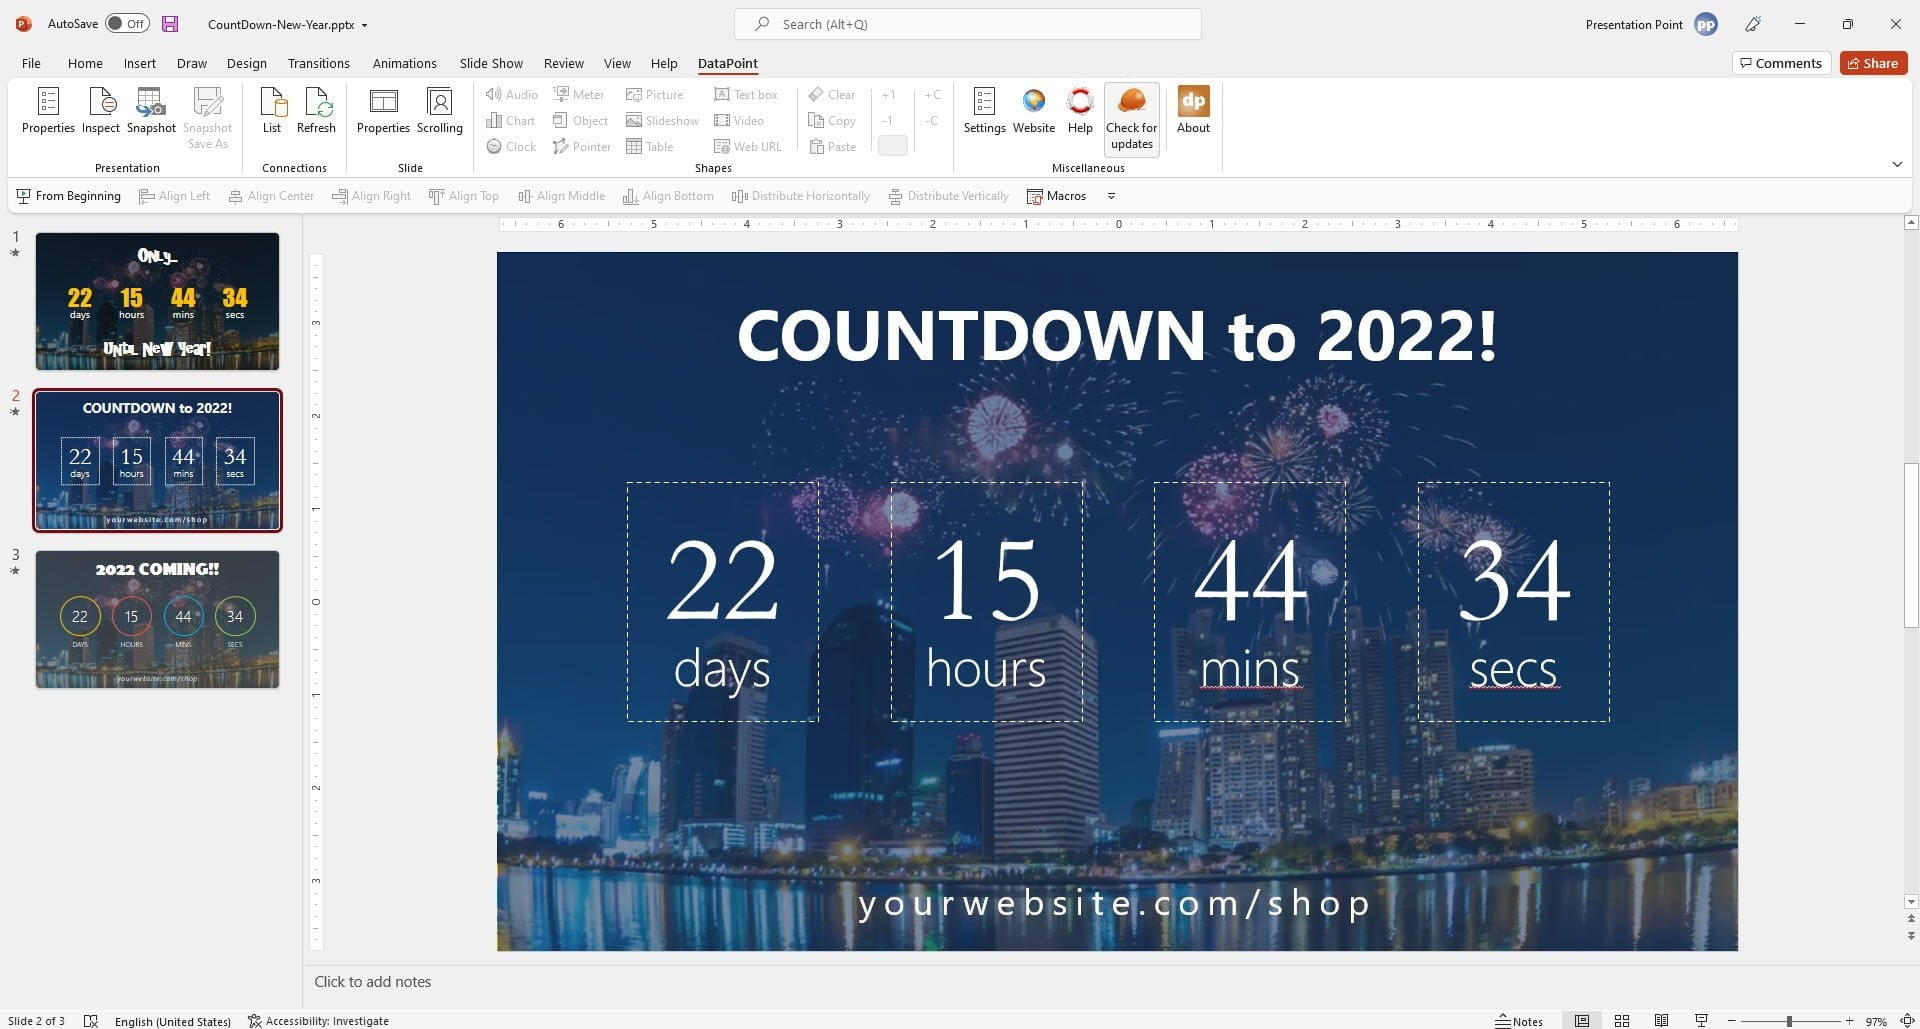 PointPoint presentation for a countdown to New Year